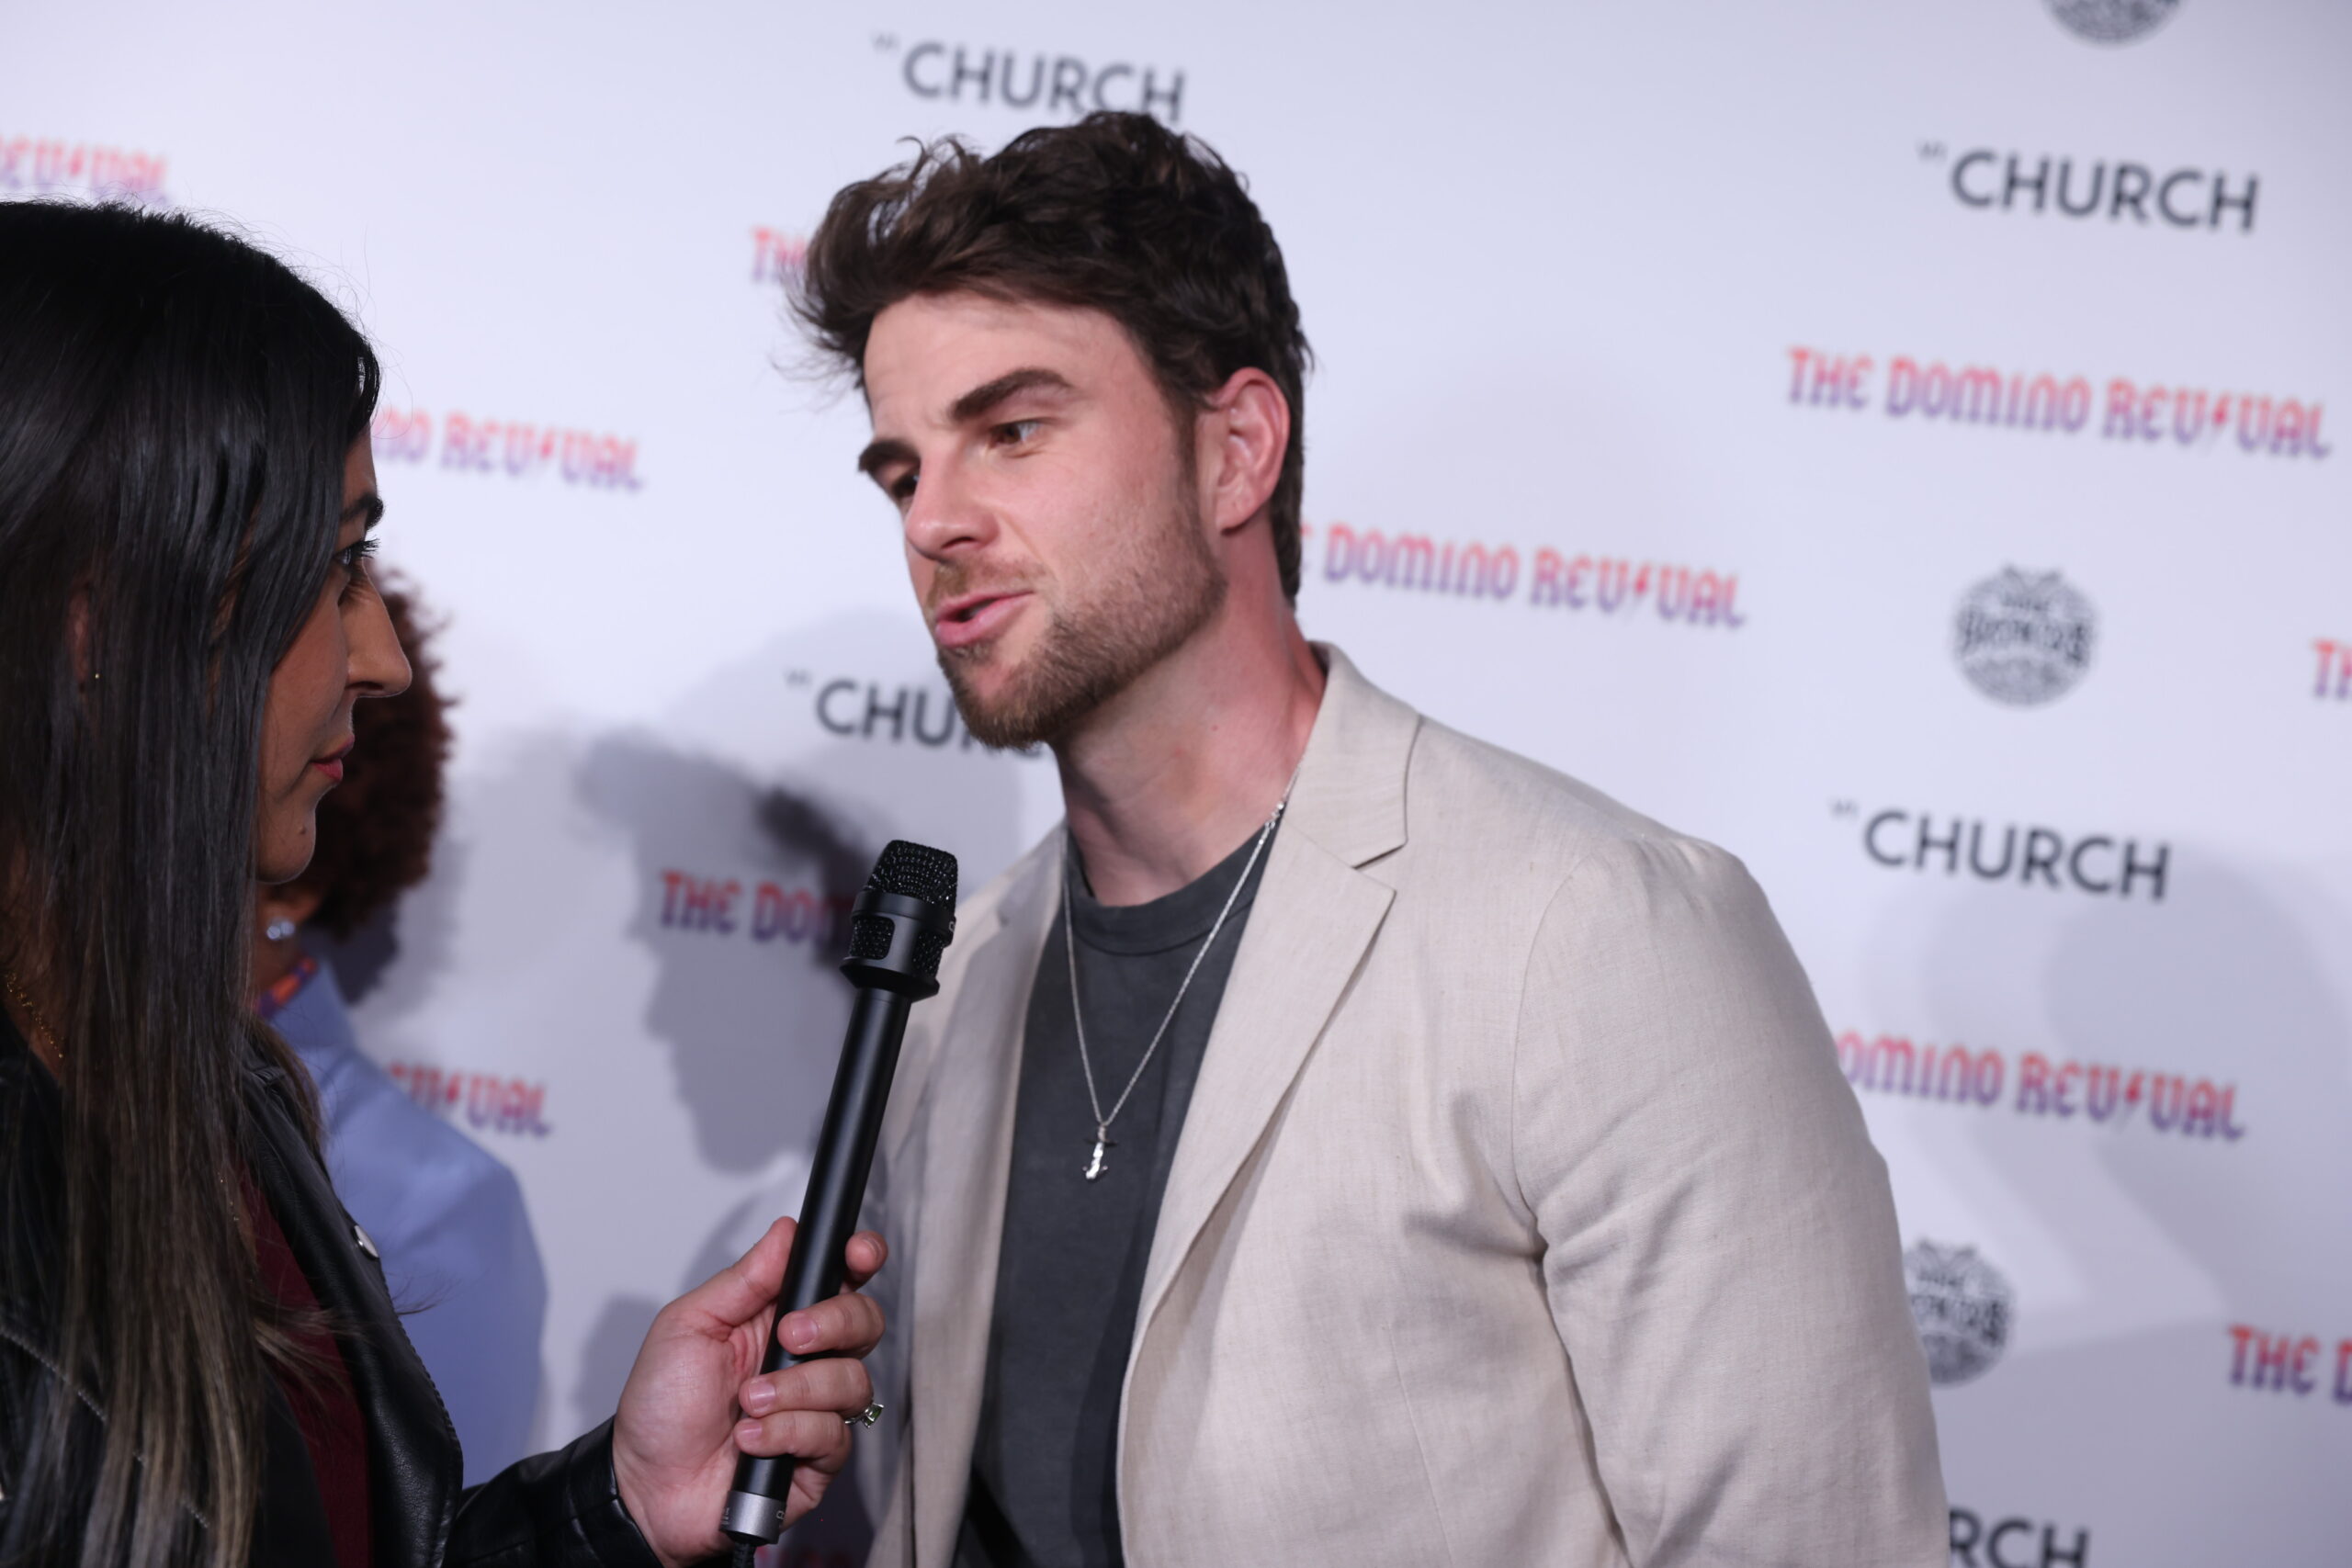 Nate Buzz on the Red Carpet of The Domino Revival